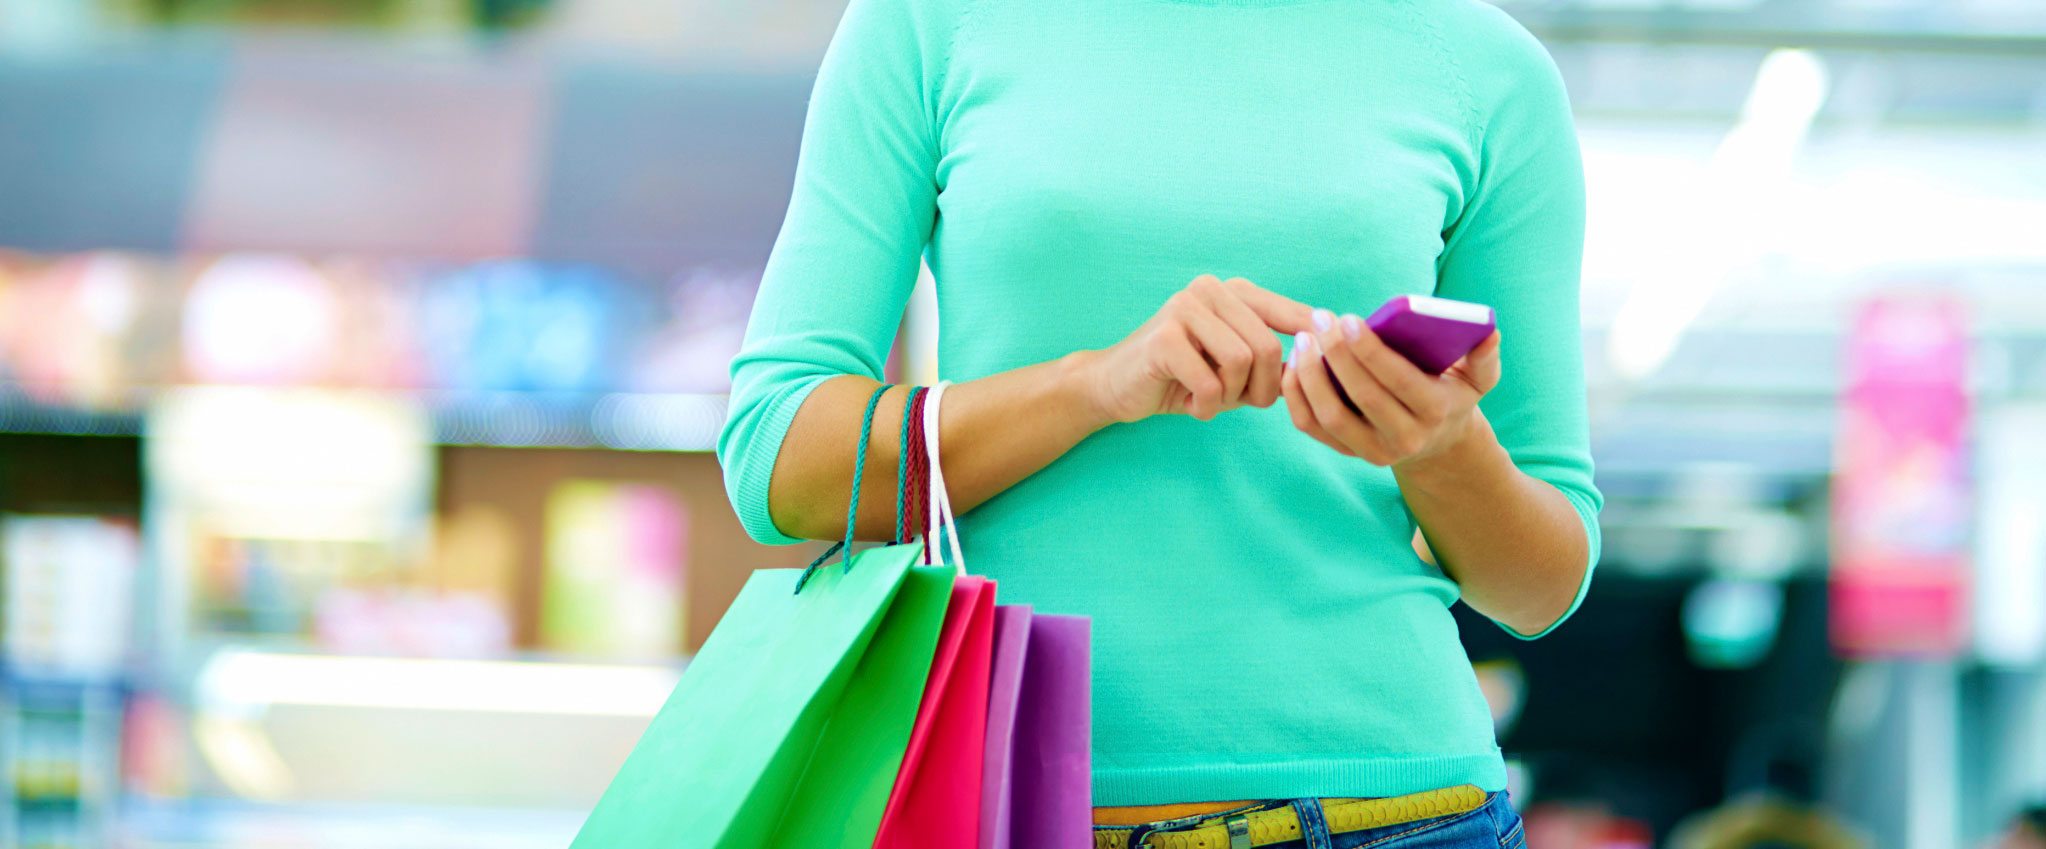 Retail Everywhere: Omni-Channel Apparel Shopping